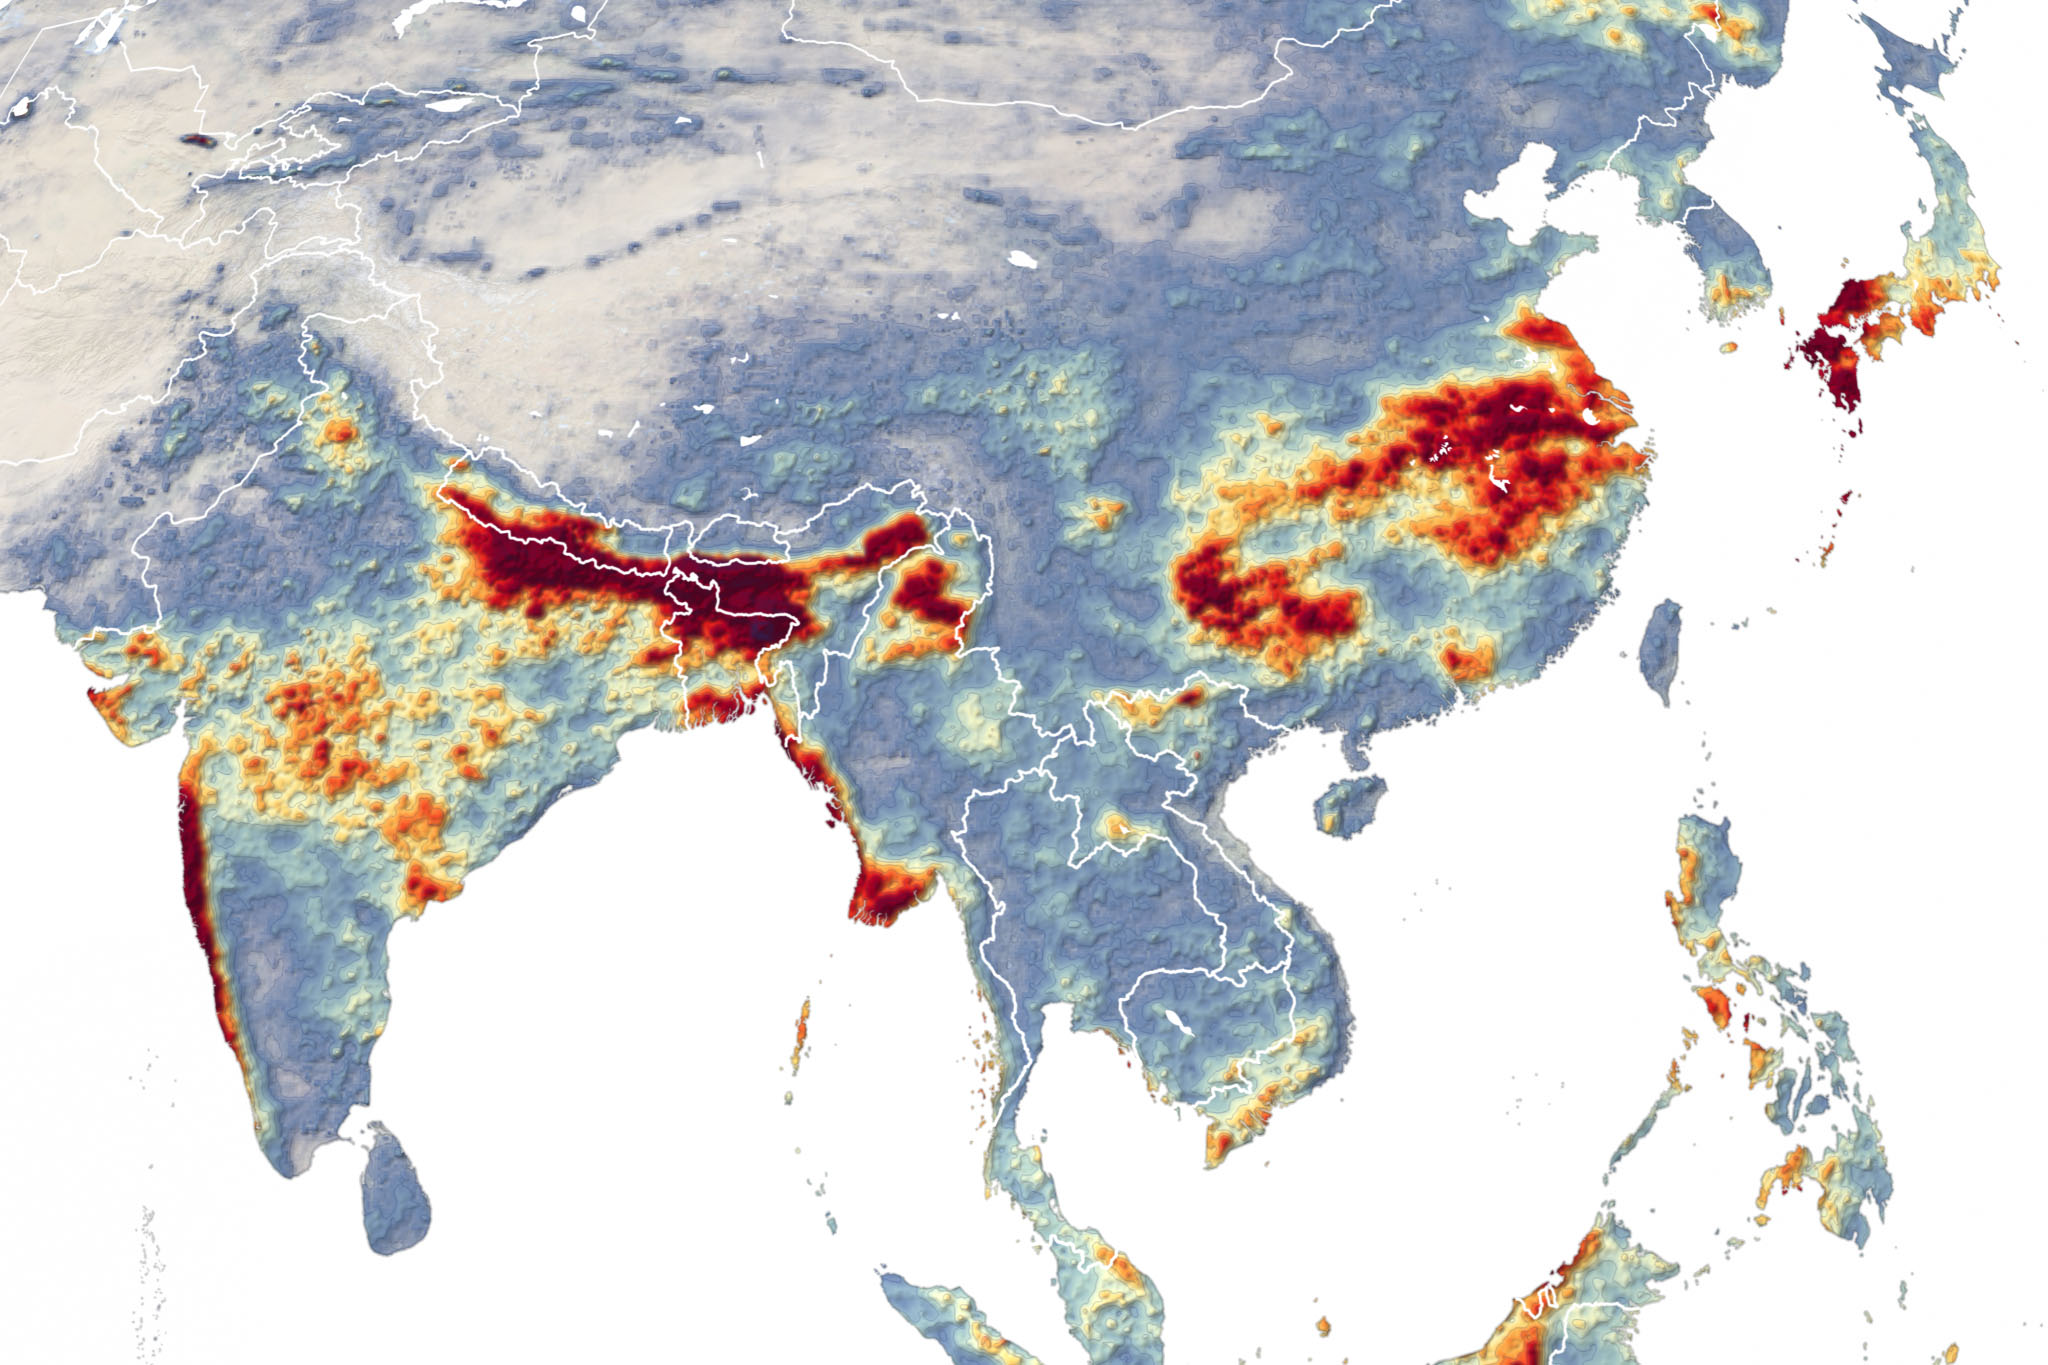 Excessive monsoon rainfall captured by NASA Earth Observatory across South and East Asia in July 2020